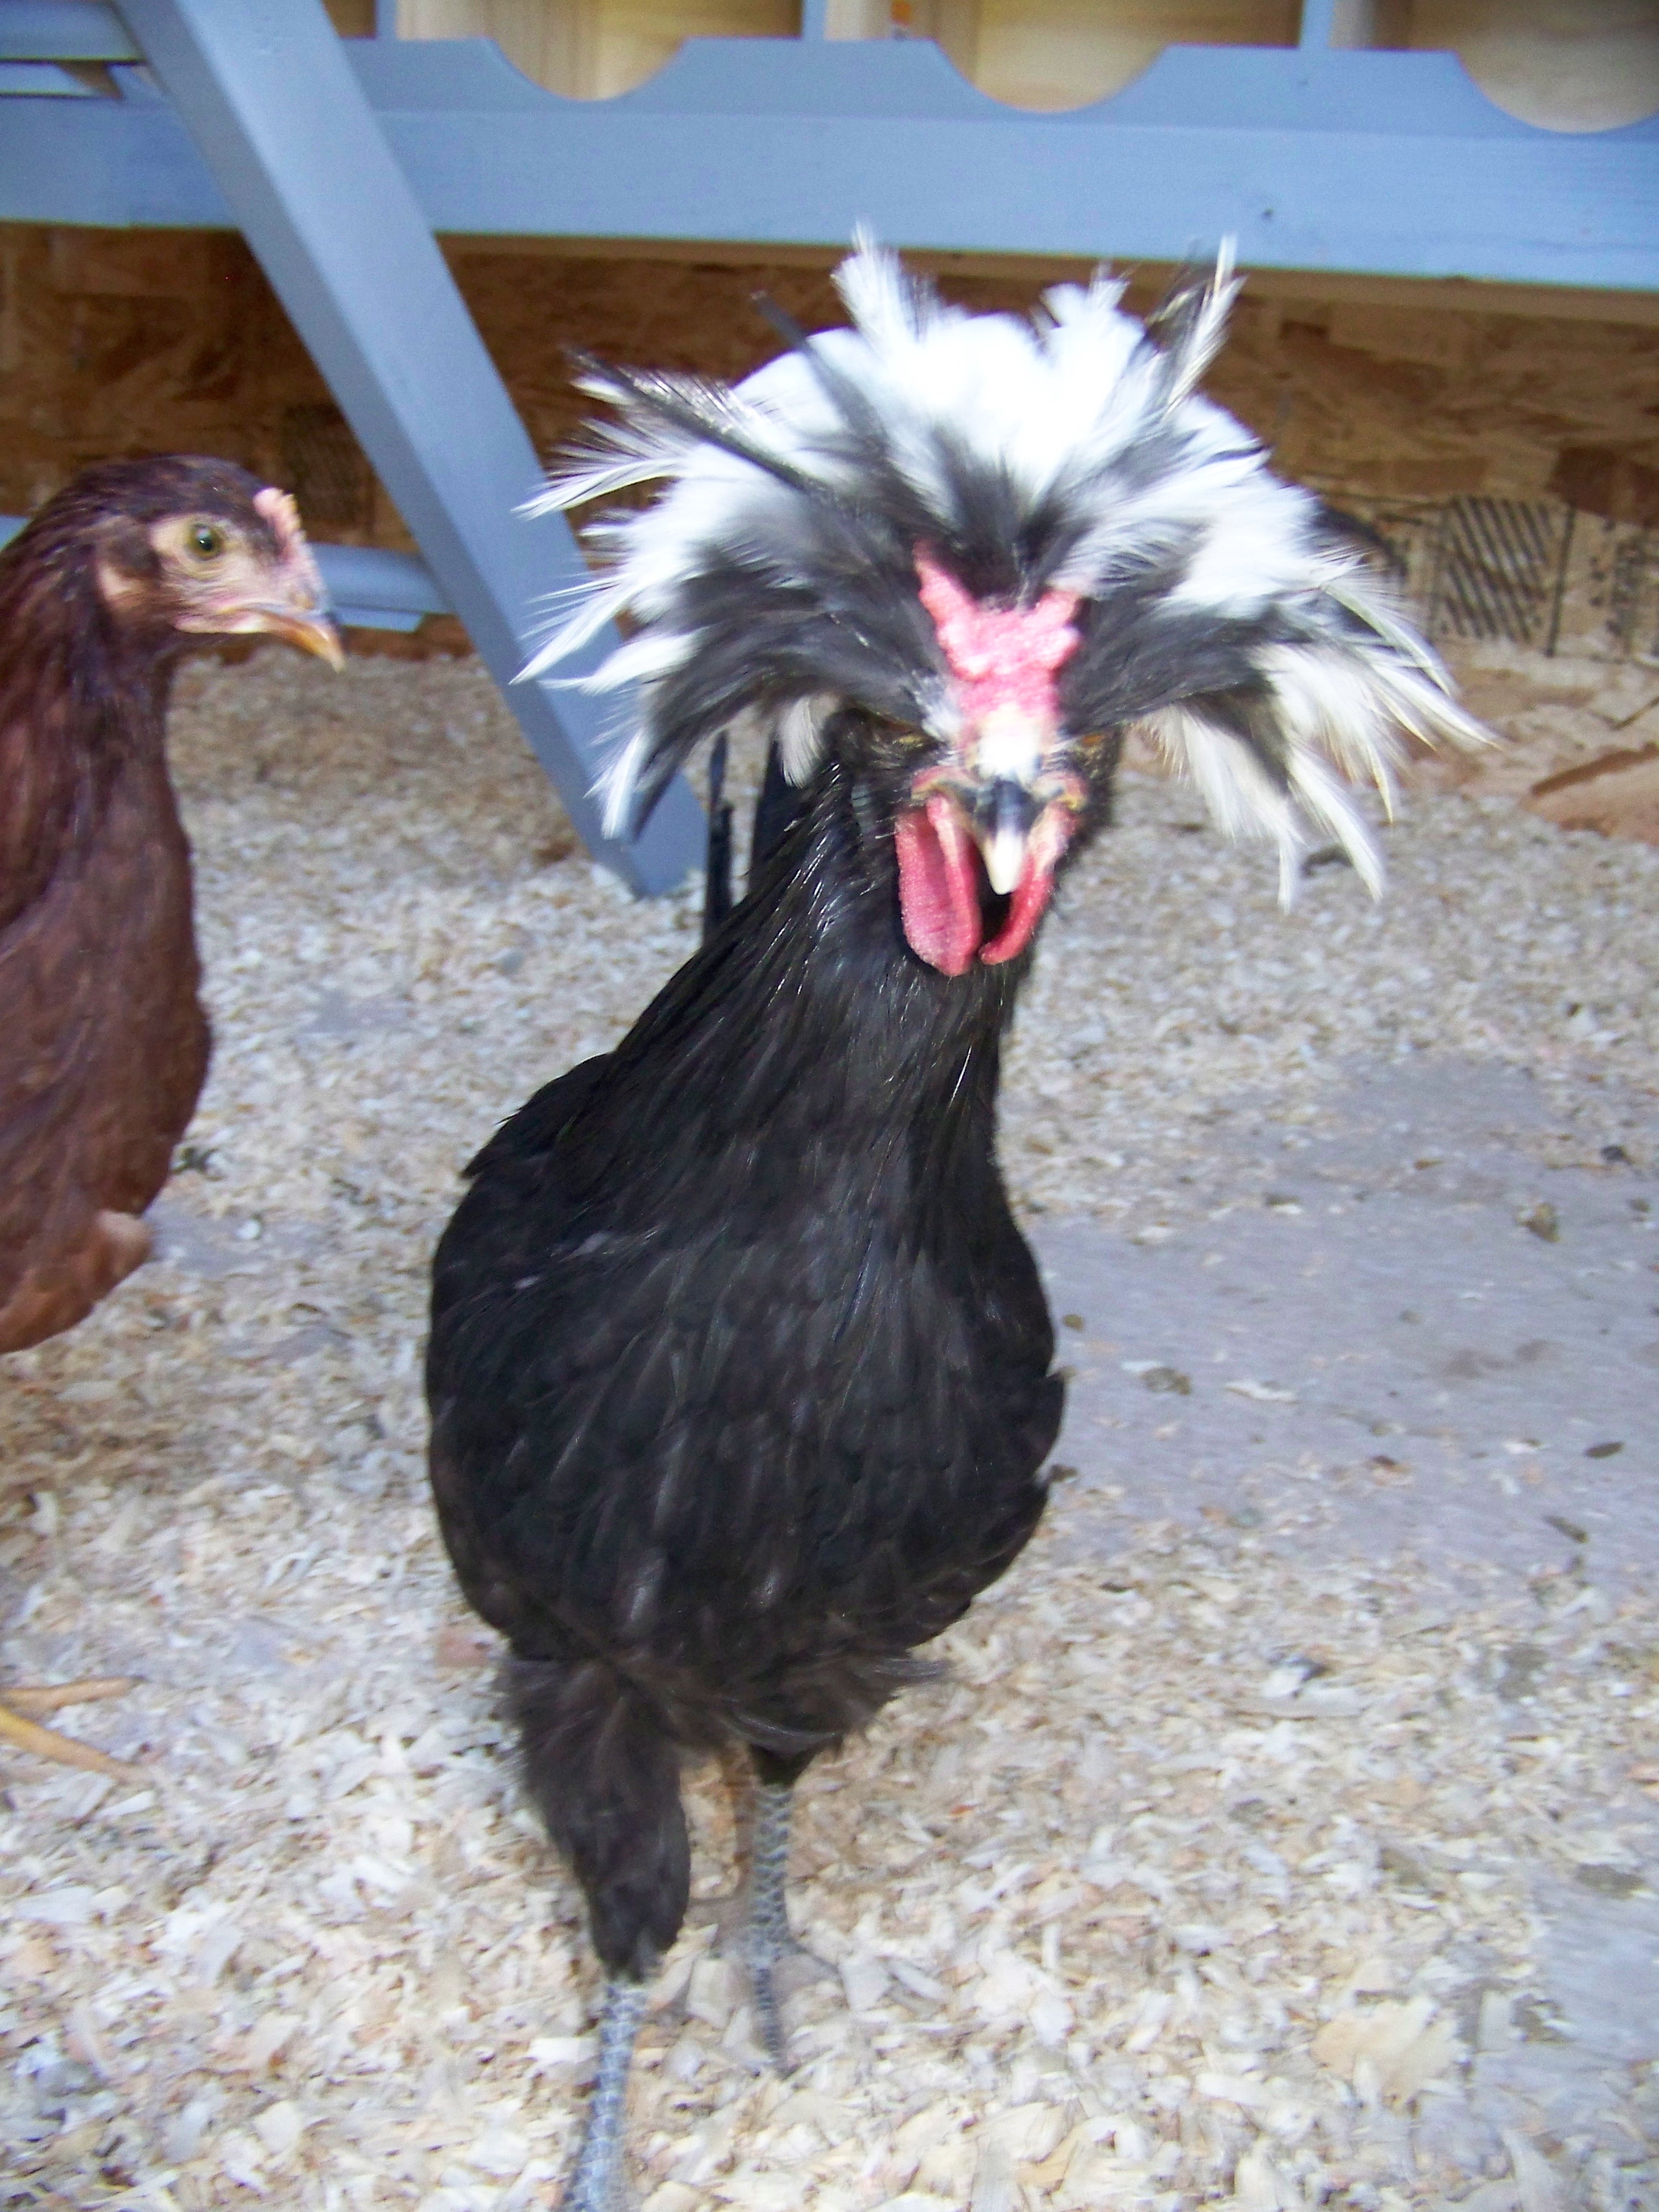 Polish crested rooster